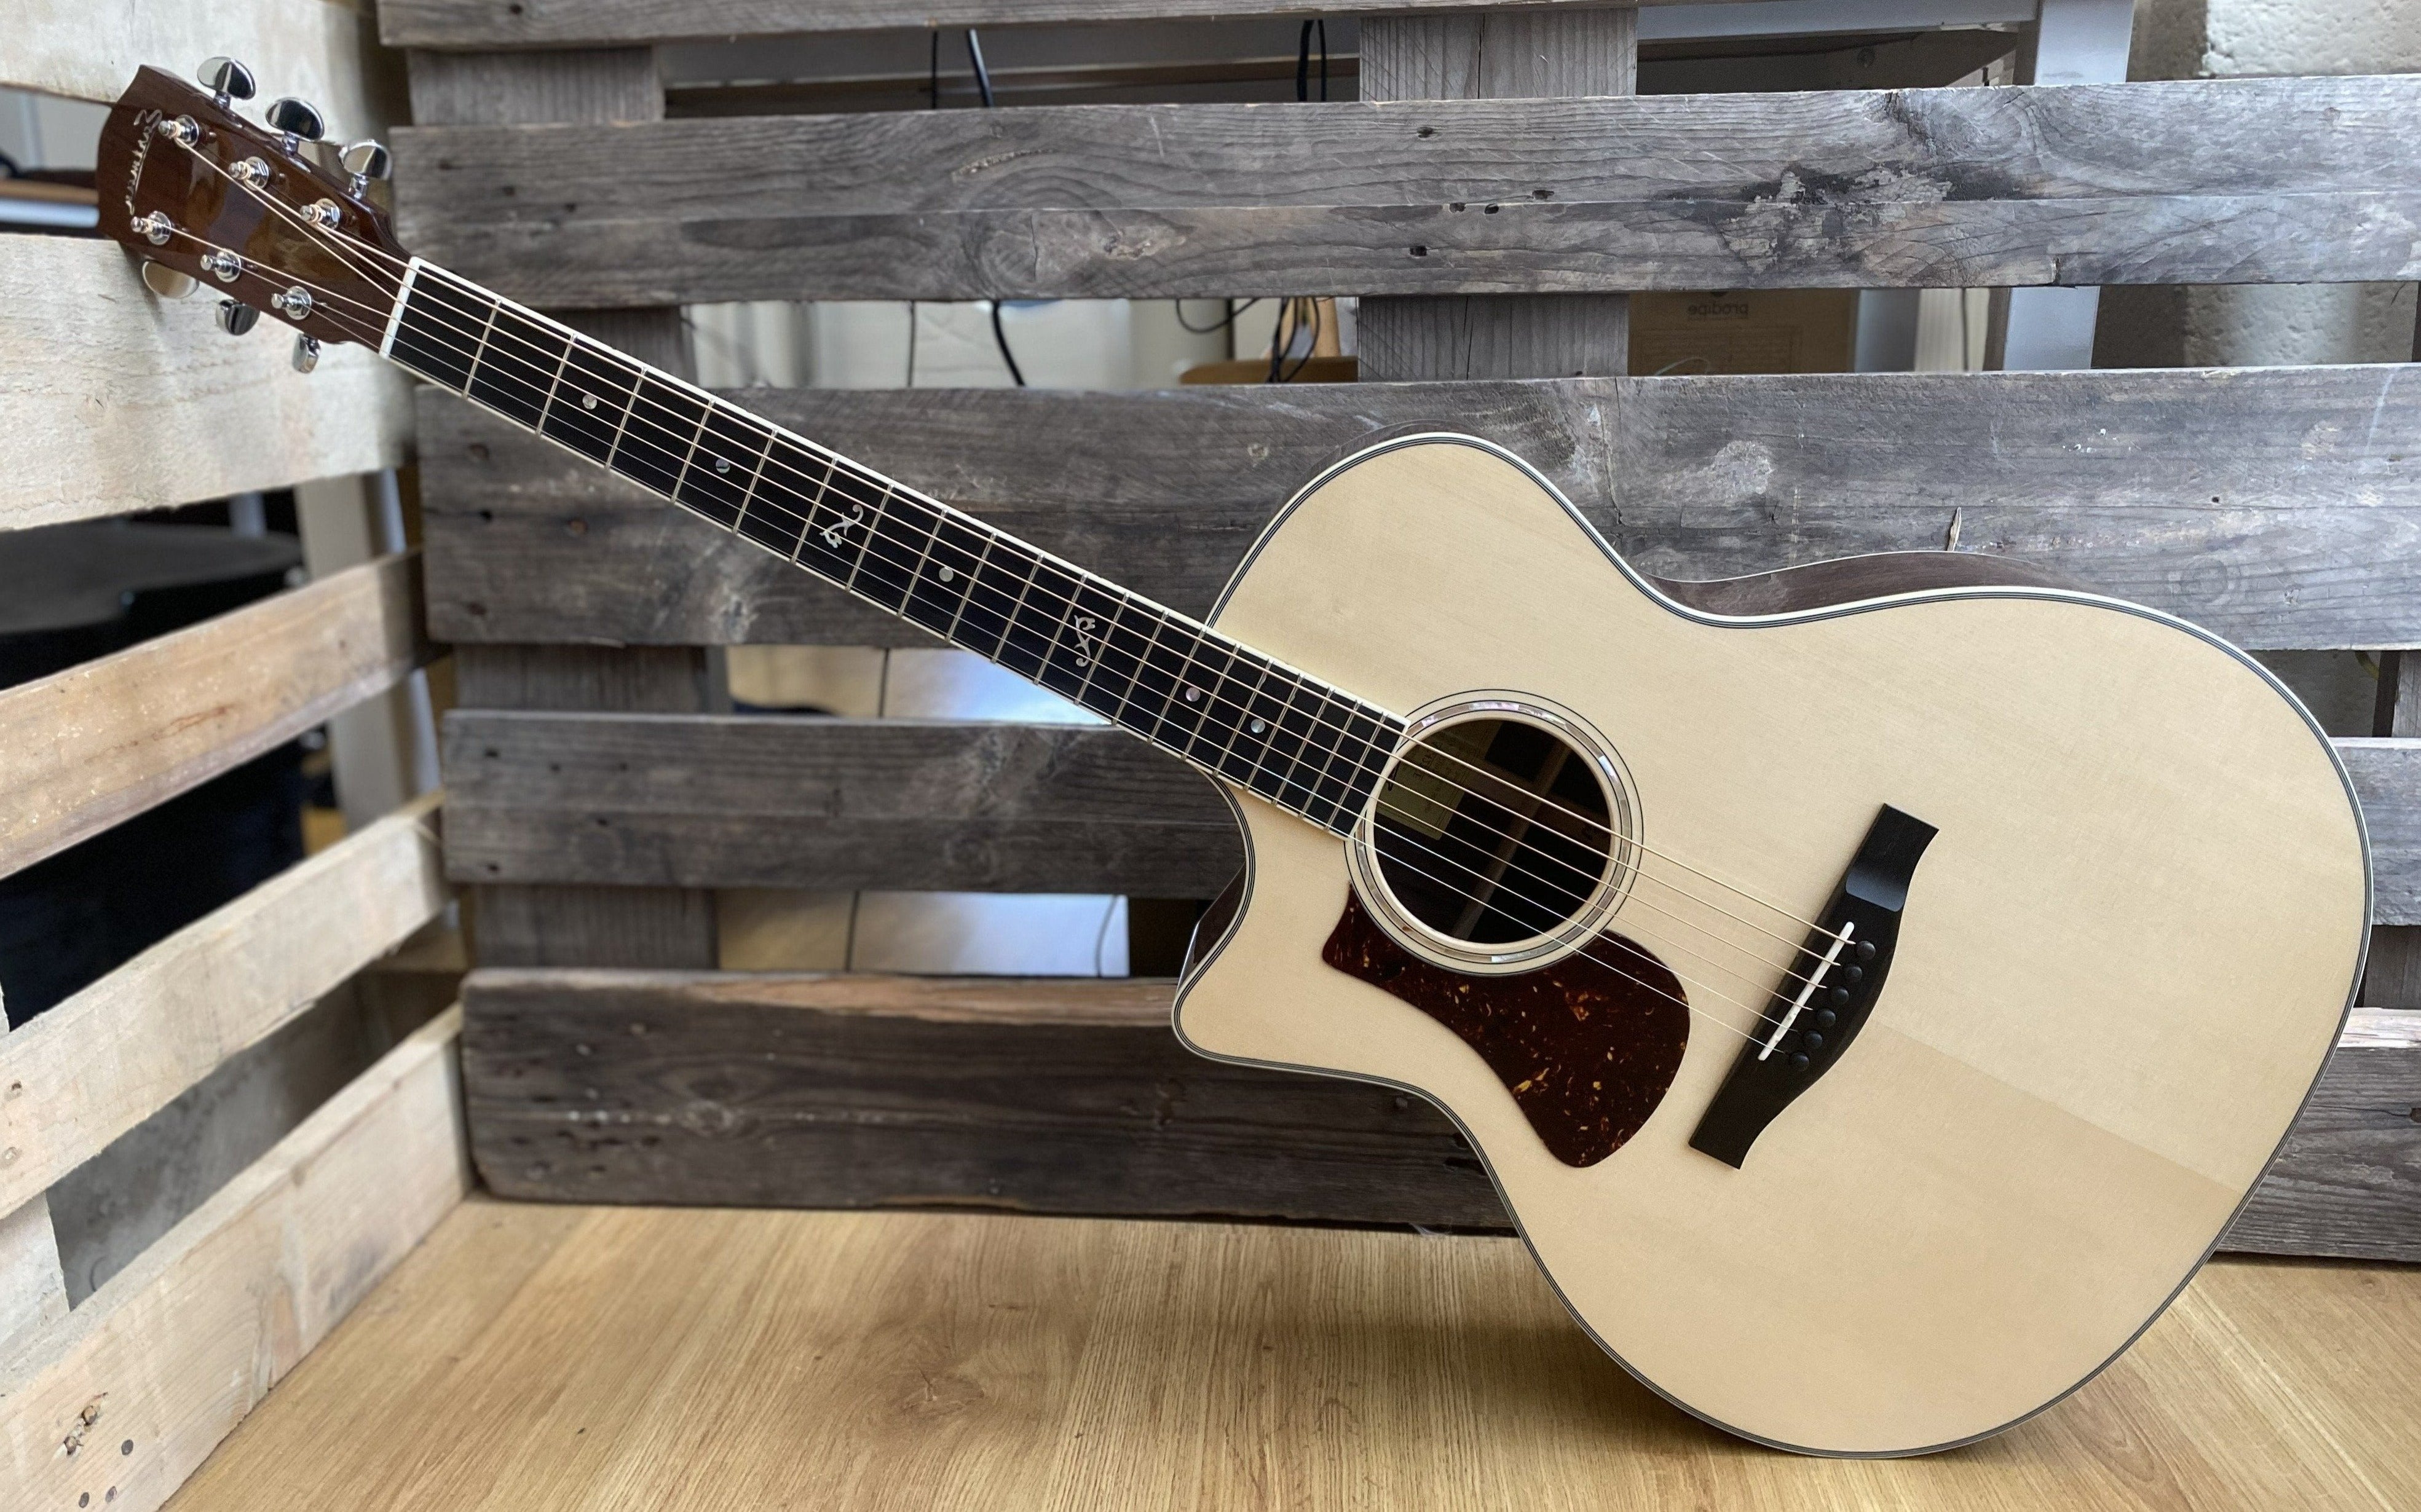 Eastman AC422LCE Grand Auditorium w/ cutaway and LR Baggs VTC Left Handed, Electro Acoustic Guitar for sale at Richards Guitars.